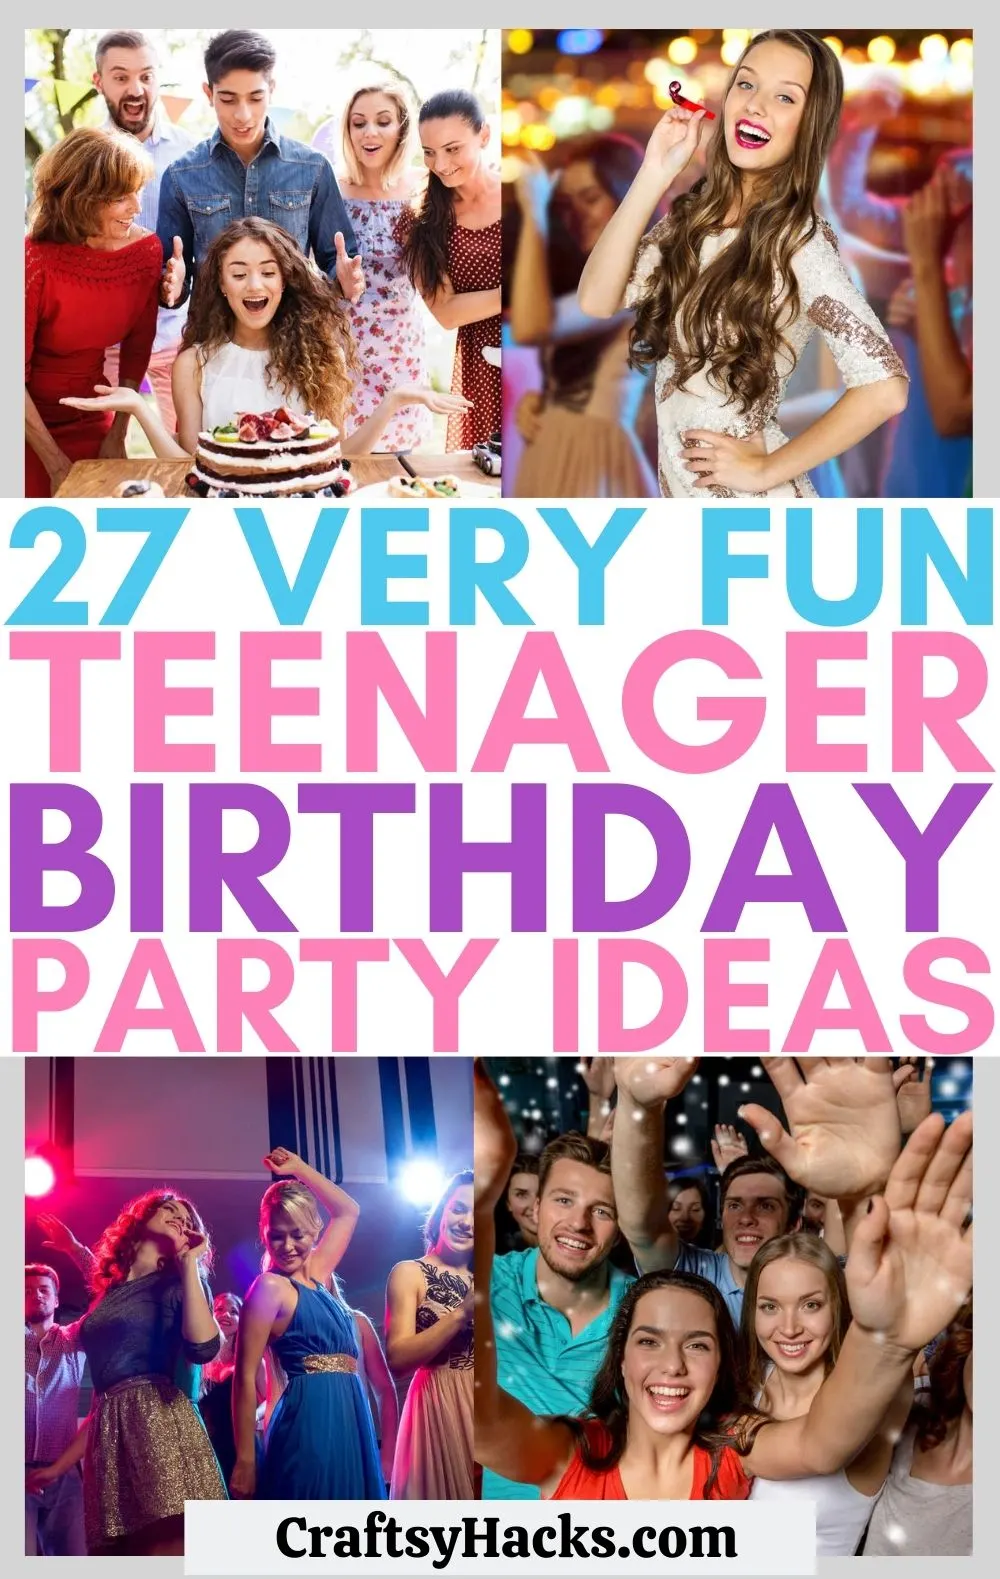 What To Do At A Teenage Birthday Party?